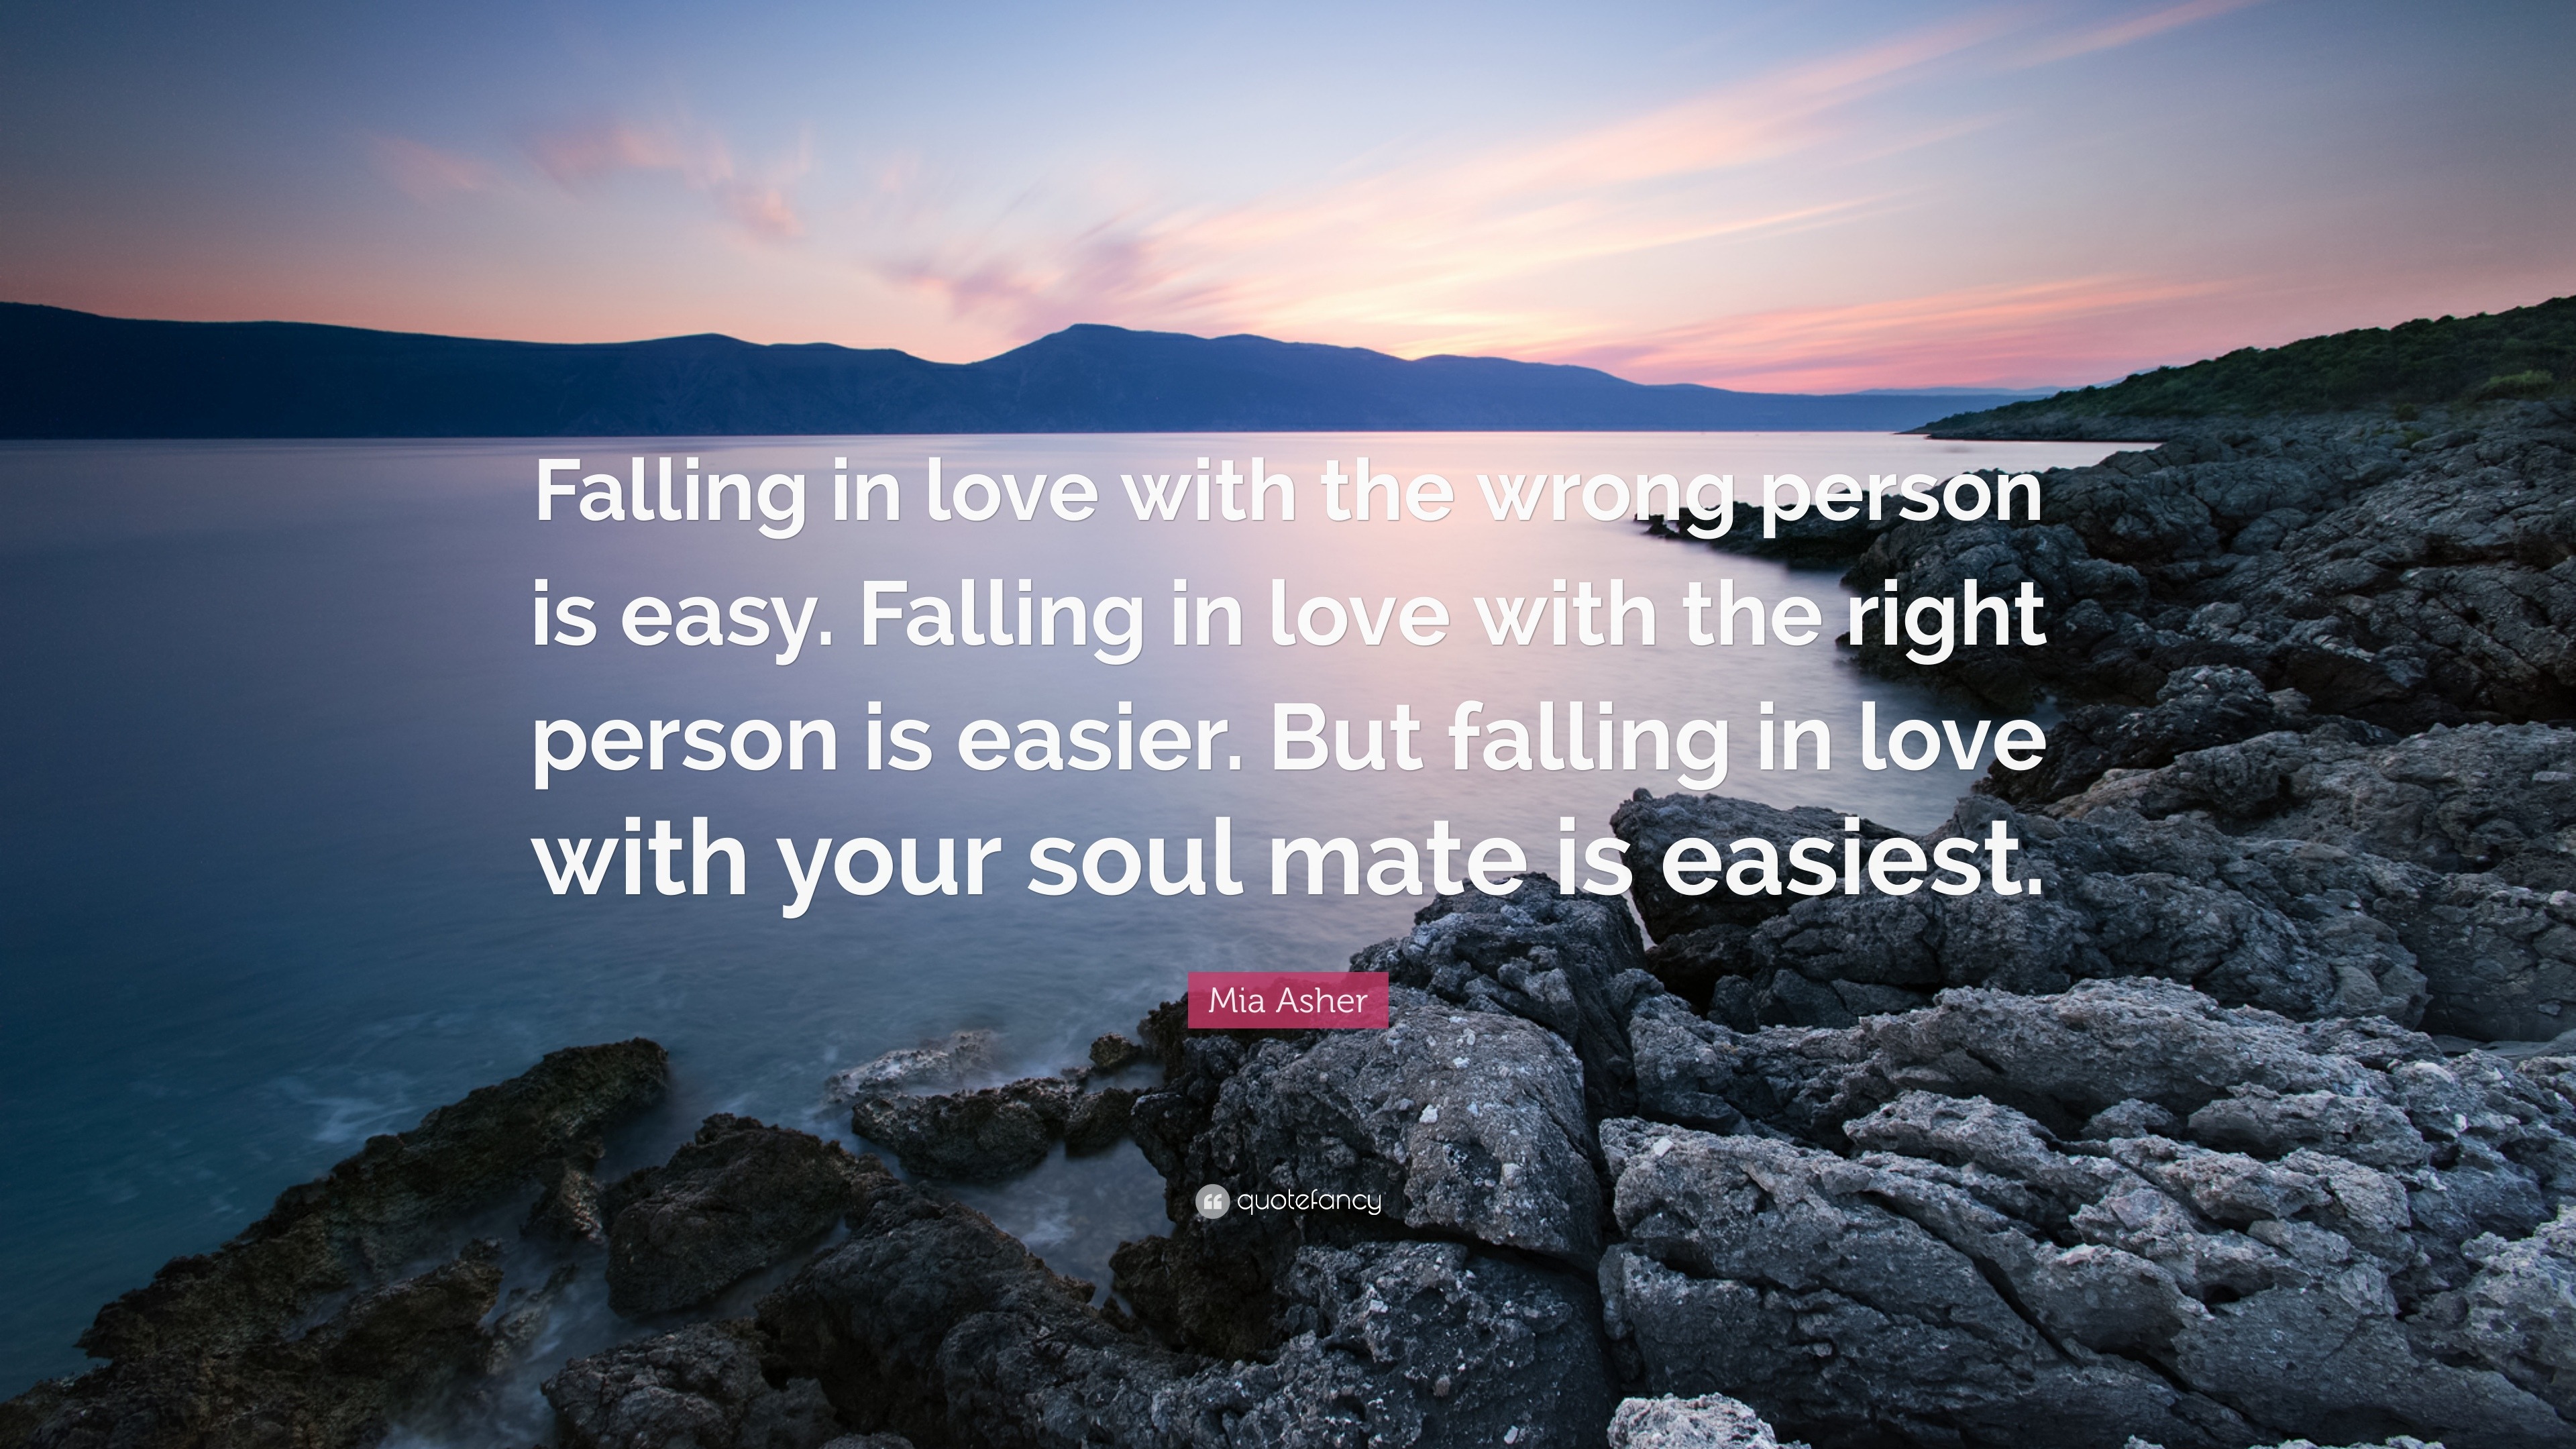 Mia Asher Quote “Falling in love with the wrong person is easy Falling